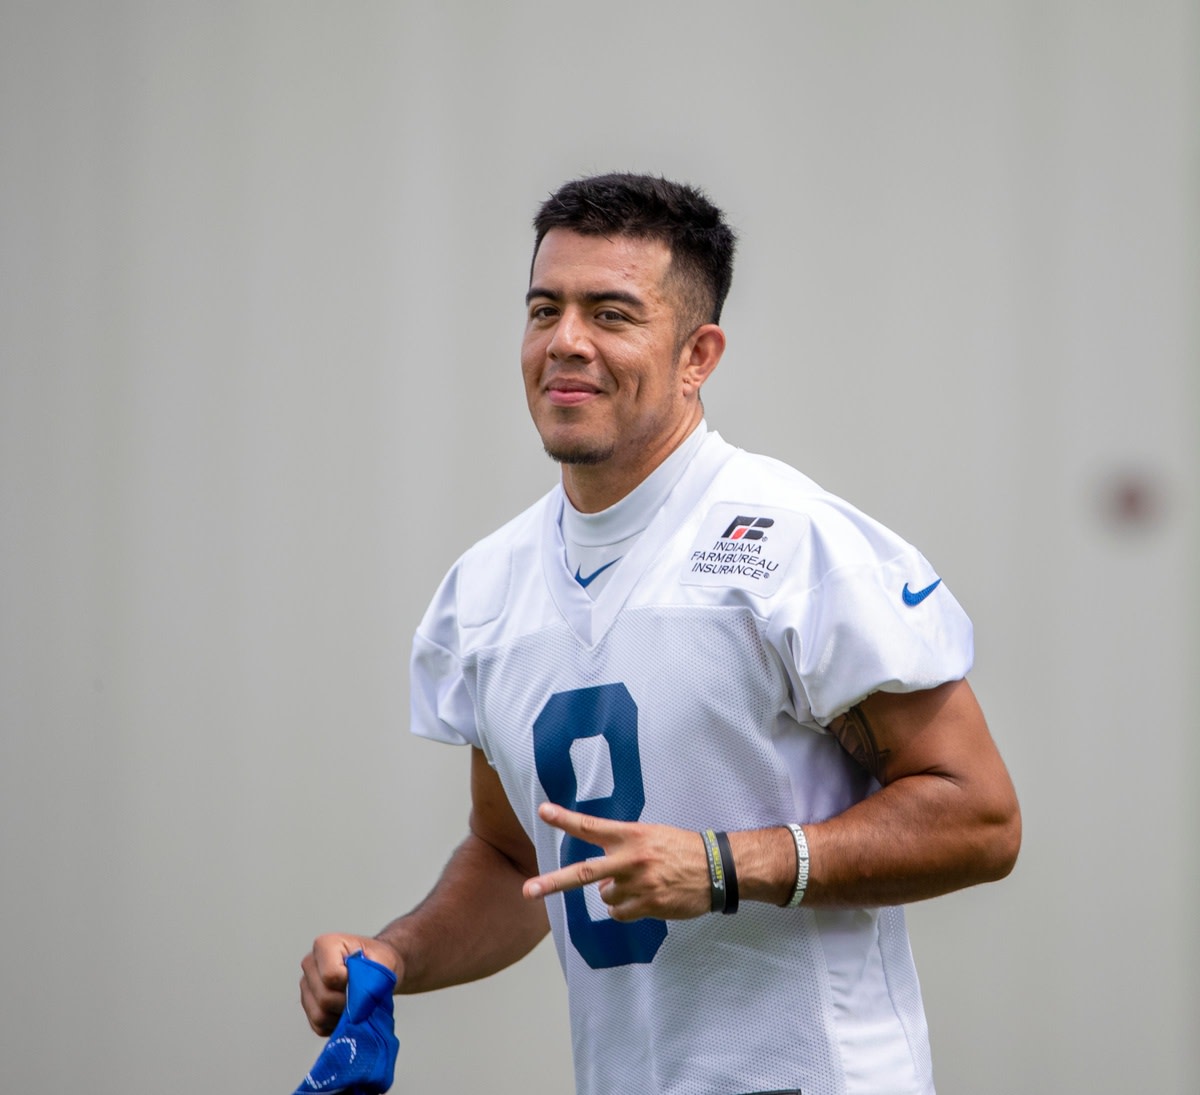 Indianapolis Colts punter Rigoberto Sanchez has pinned opponents inside the 20 on four of his six punts this season.